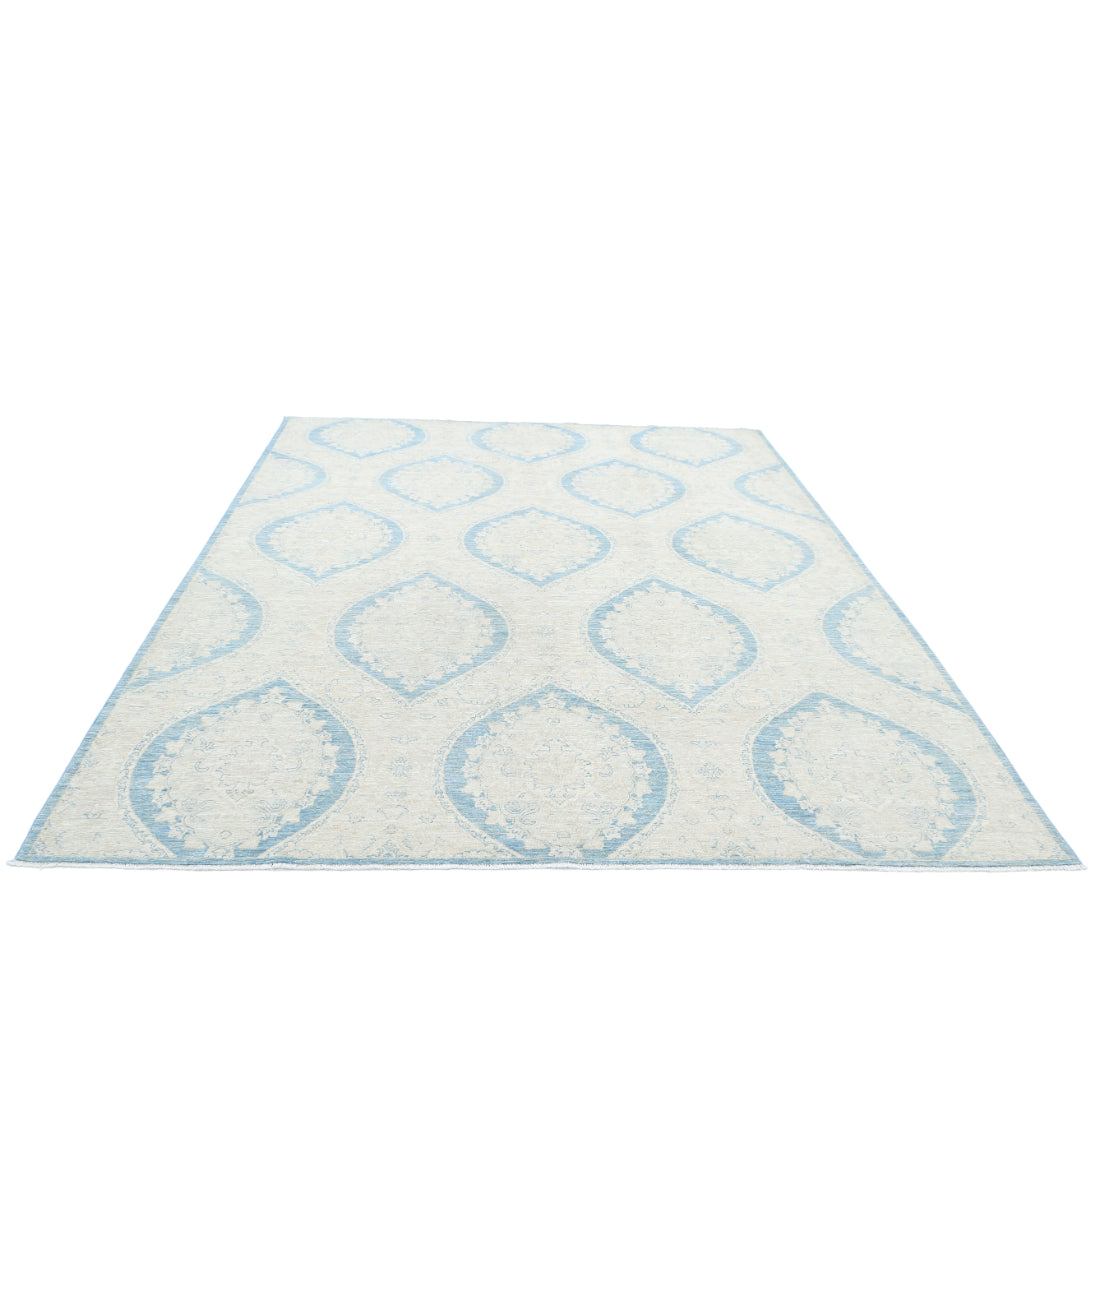 Hand Knotted Serenity Artemix Wool Rug - 8'0'' x 10'0'' 8'0'' x 10'0'' (240 X 300) / Blue / Ivory